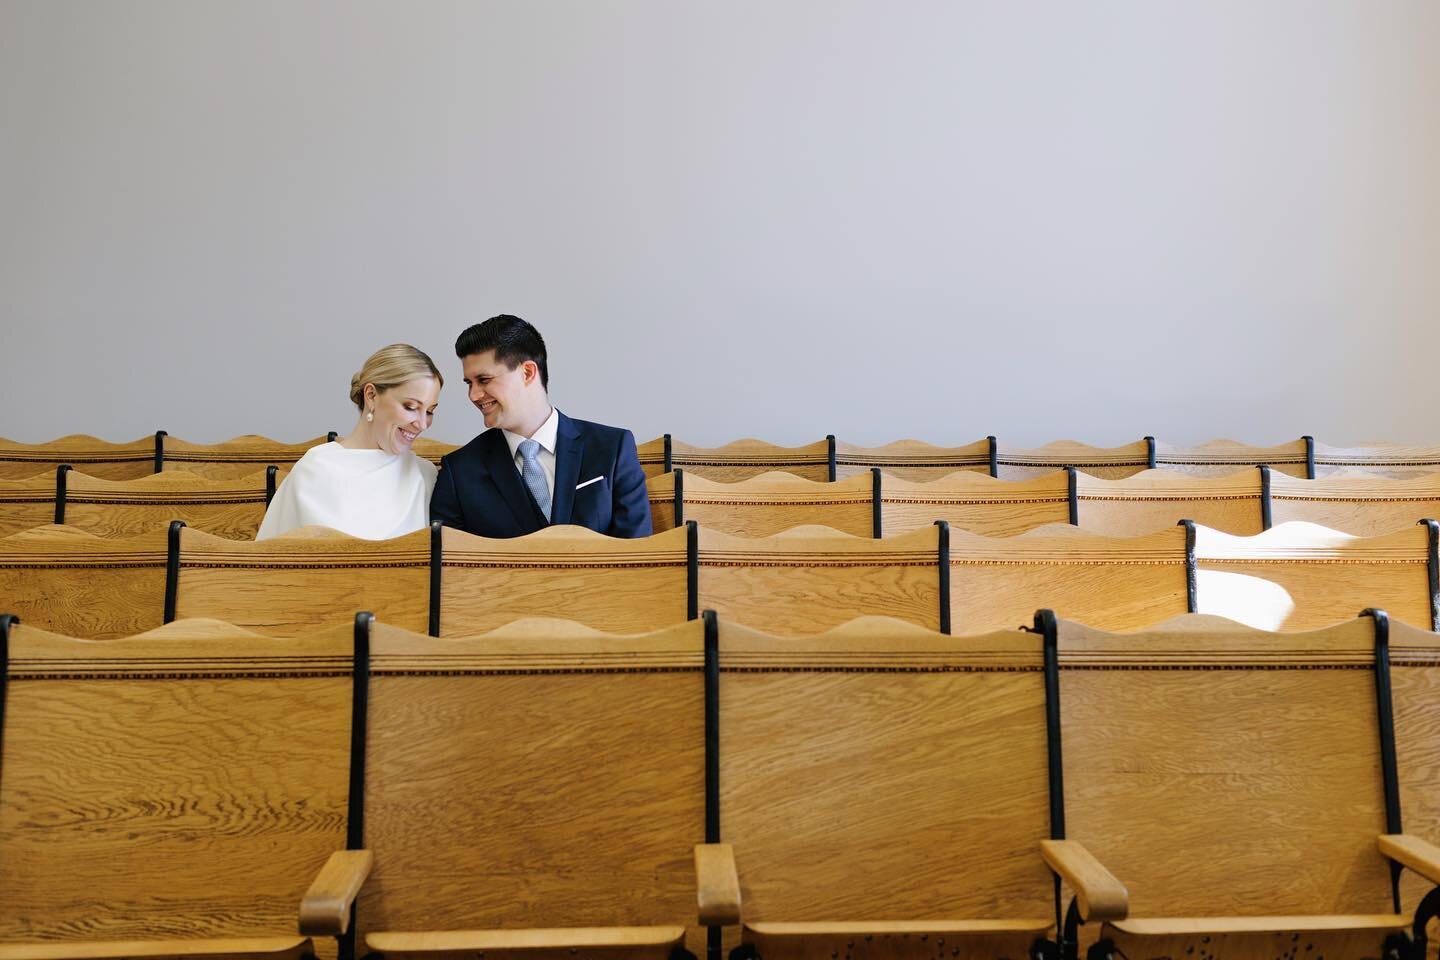 J&amp;E eloped at the courthouse in their small town last March, with their parents and grandparents as witnesses. Their love story is a timeless one, and their wedding day felt that way as well. Classic and sincere. 

After they were married, we wal